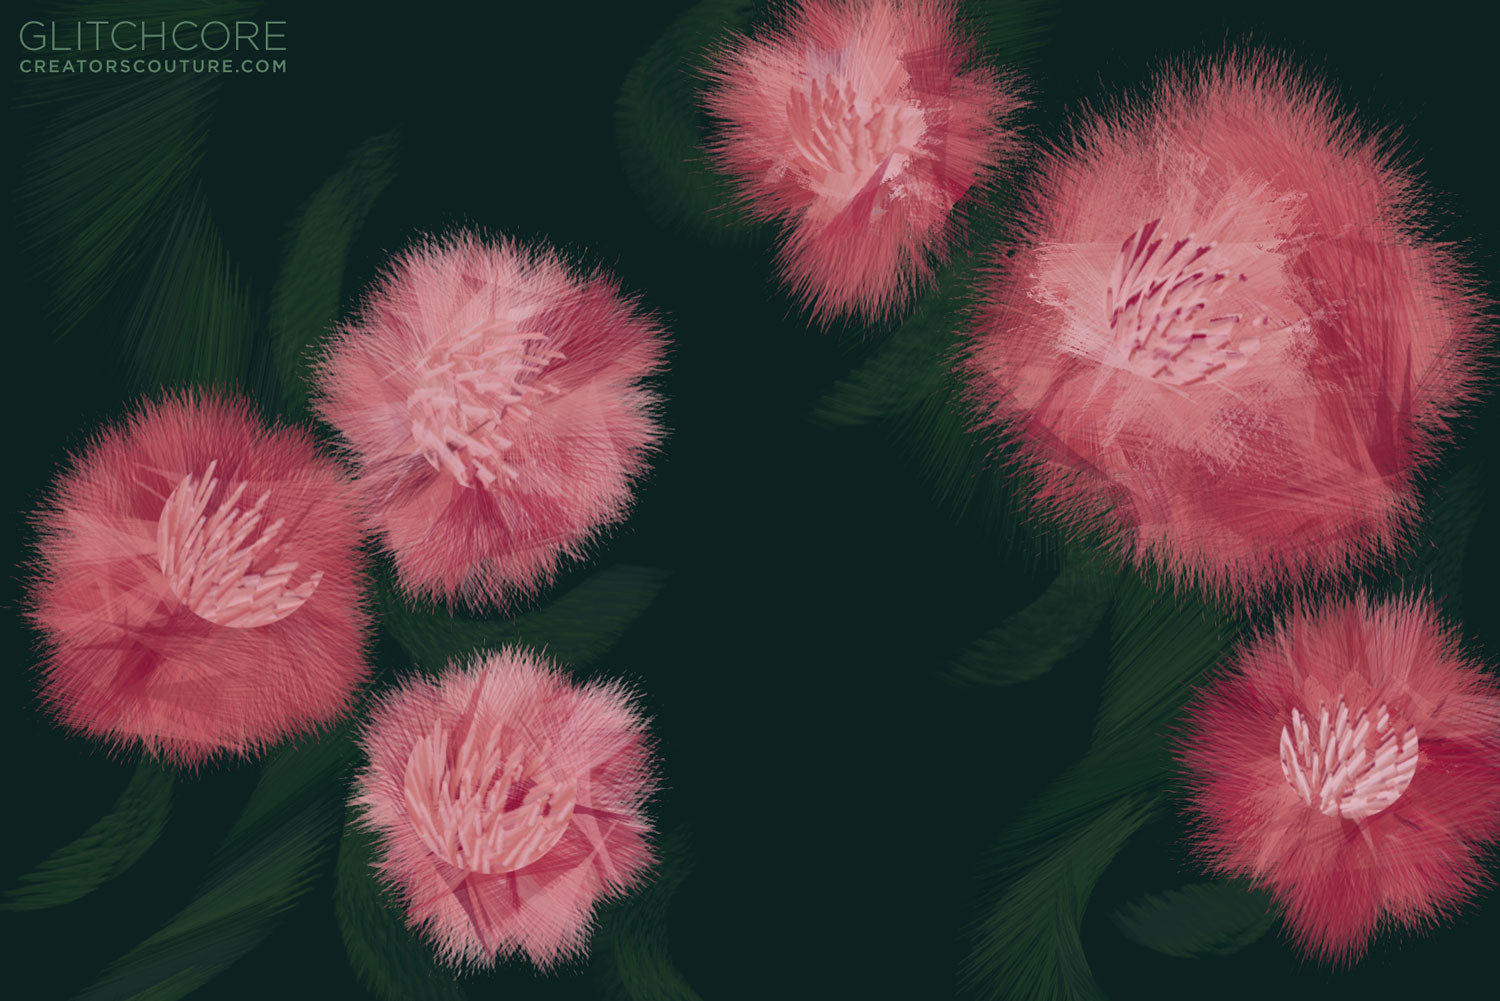 Abstract flower illustration created with glitch and tech effect multicolor Photoshop brushes, pink flowers on a dark green background 